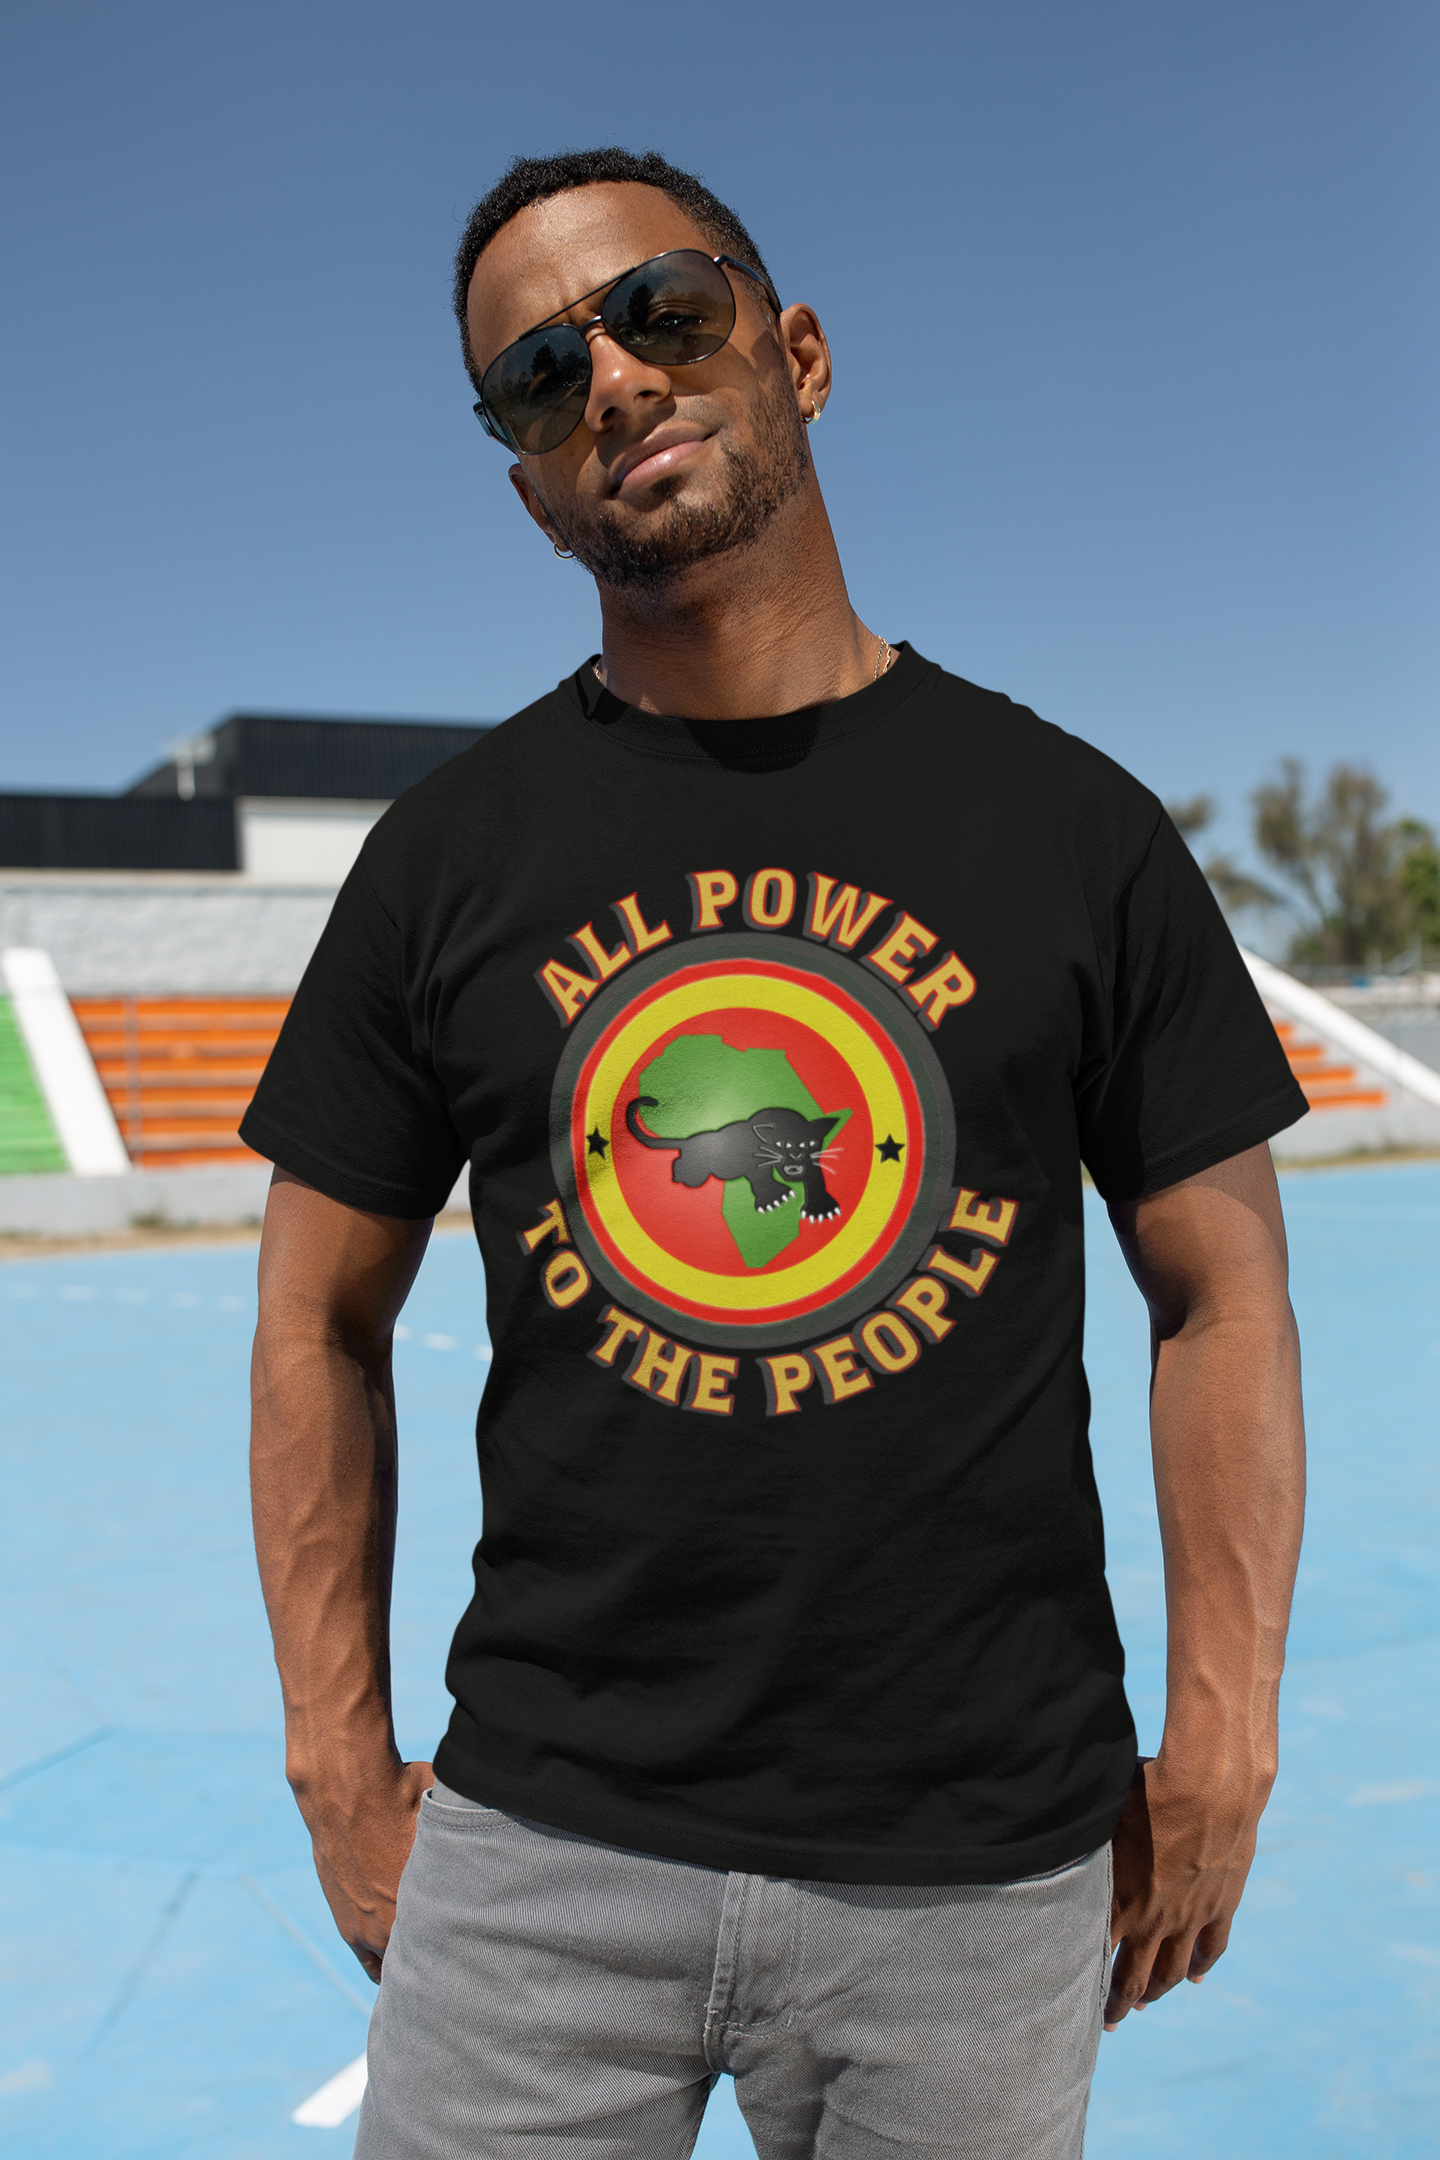 Original Black Panther Party Logo Tee - Black History Inspired Graphic T-Shirt - Celebrate African American Heritage